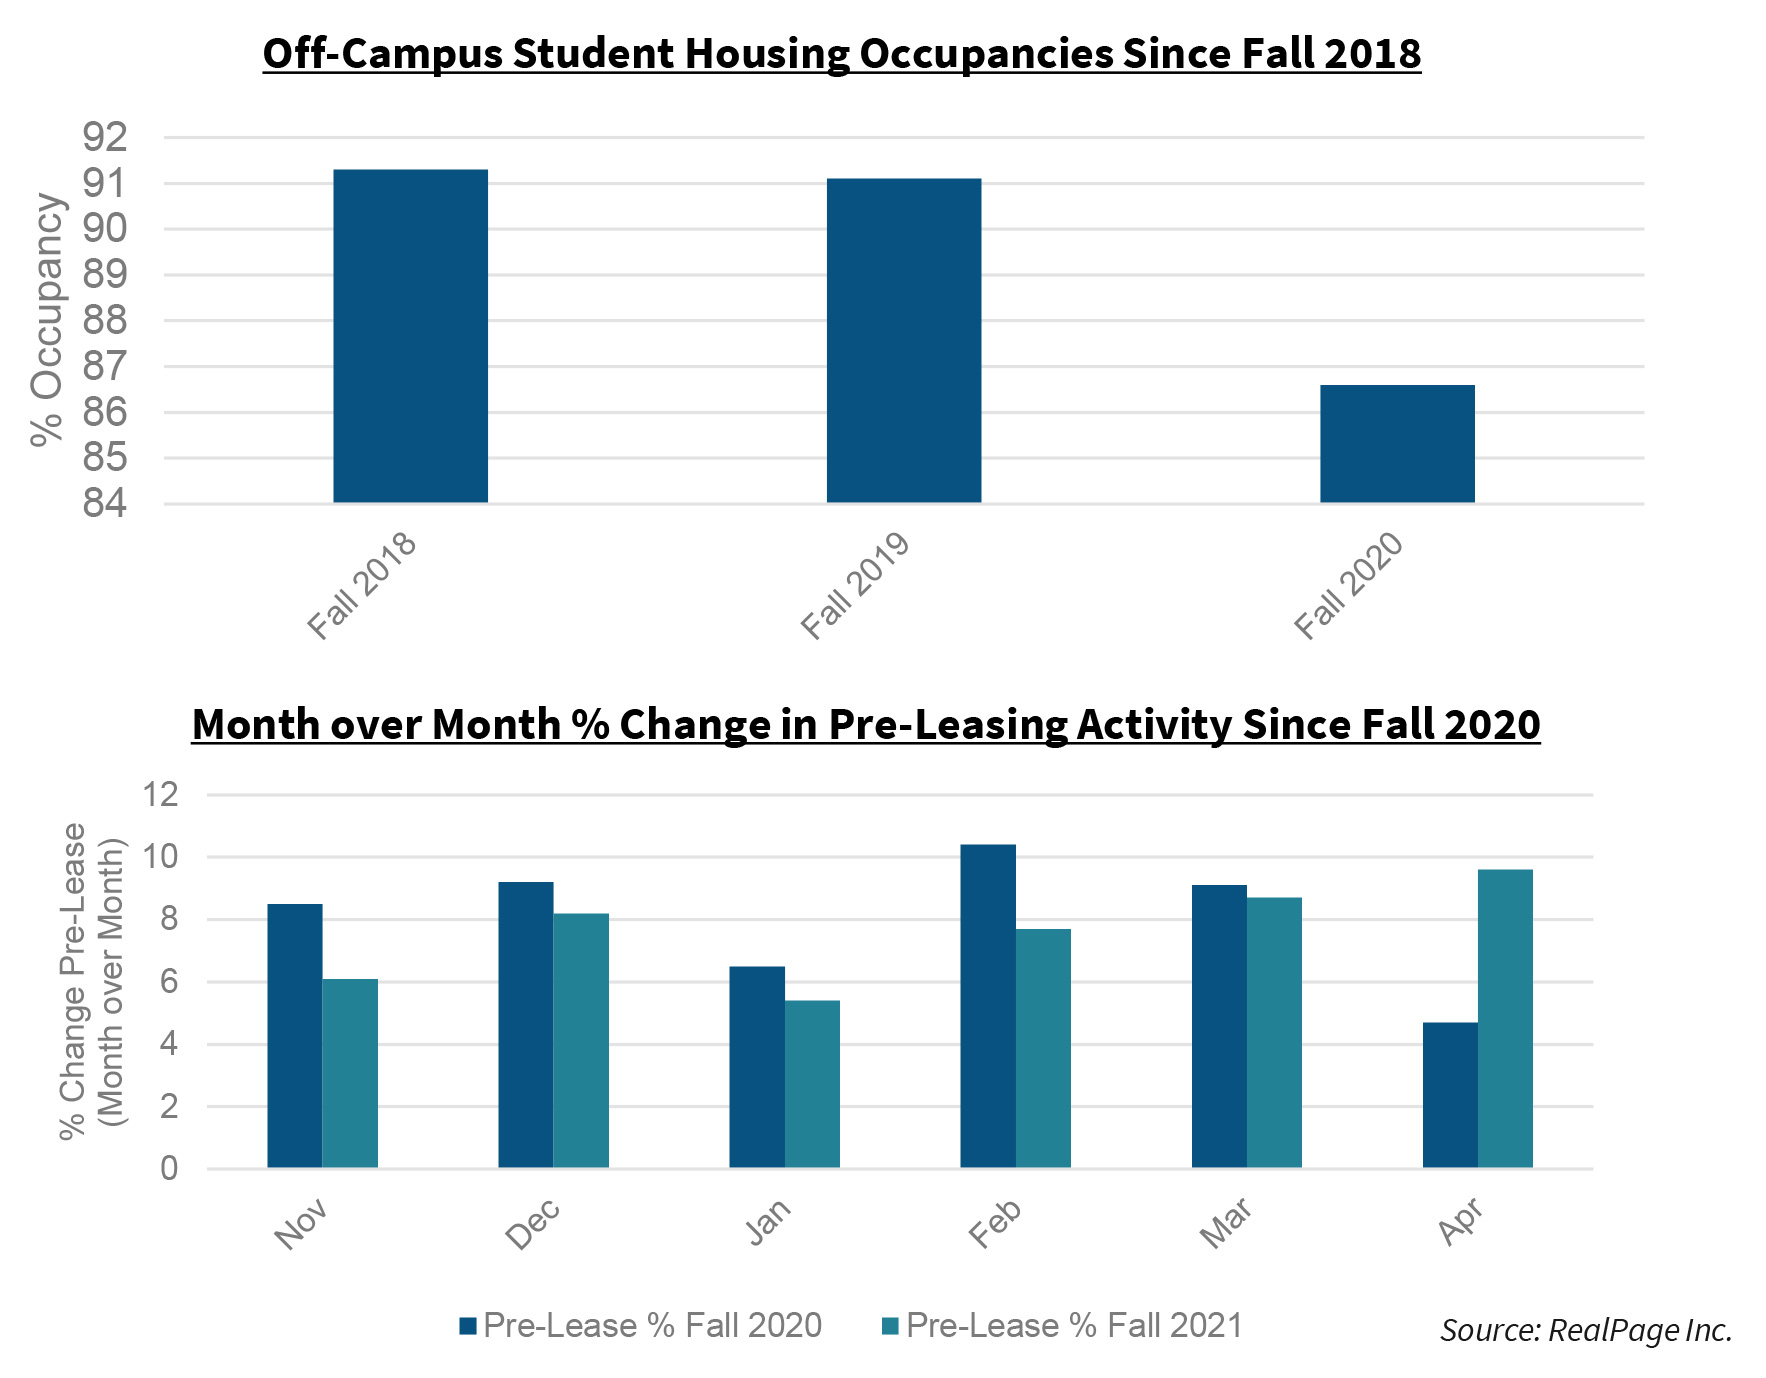 Off-Campus Student Housing Occupancies Since Fall 2018 | Month over Month % Change in Pre-Leasing Activity Since Fall 2020